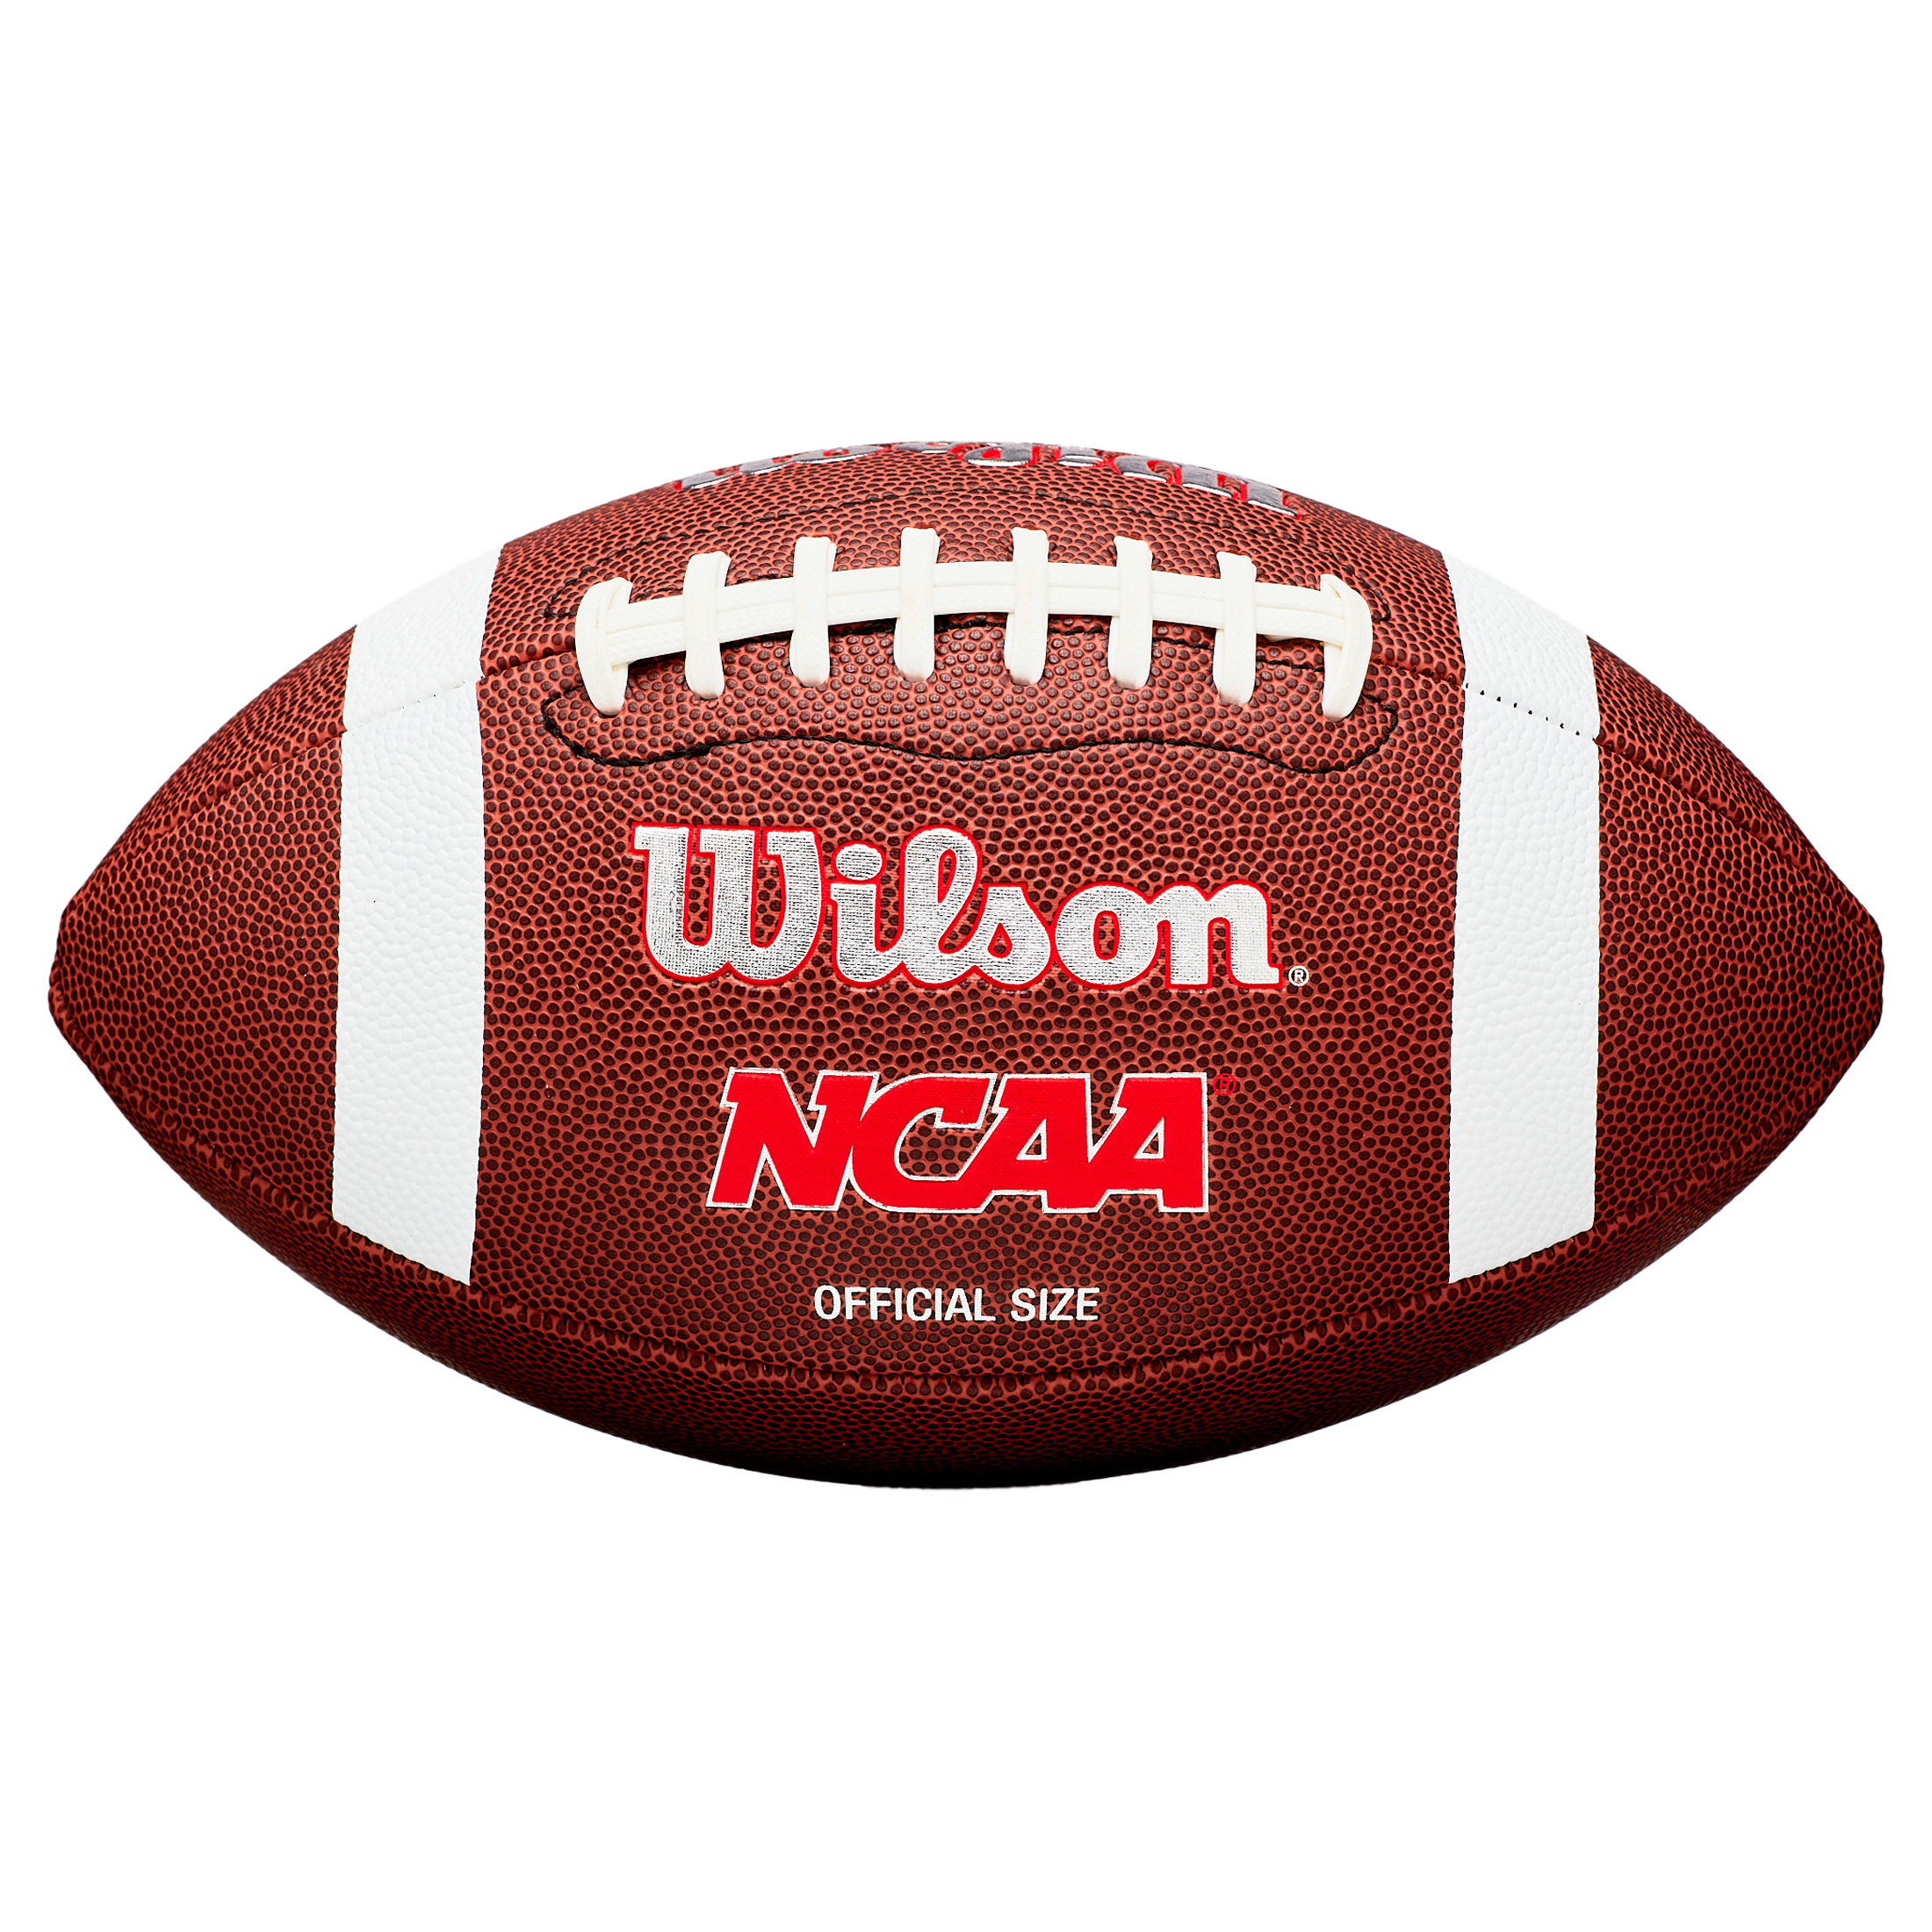 Wilson NCAA Red Zone Composite Football, Official Size (Ages 14 and up) - image 1 of 6